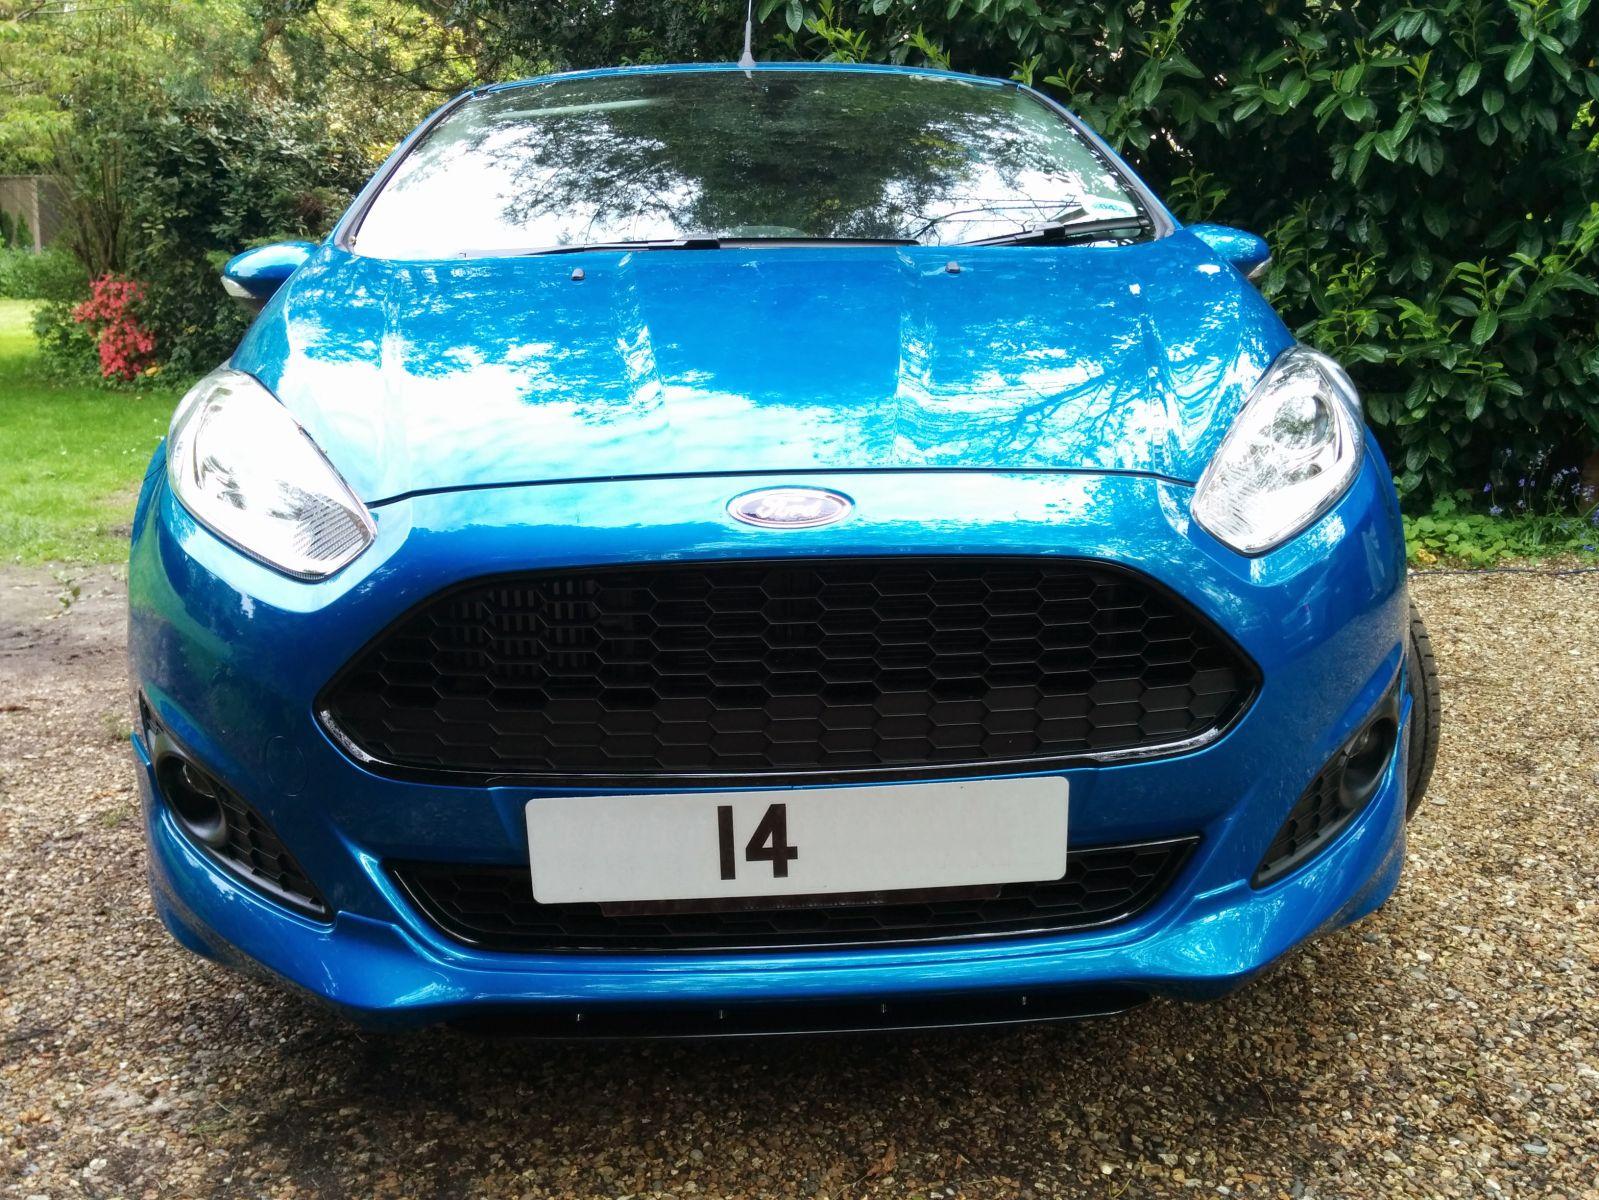 2014 Candy Blue Fiesta Zetec S Front Without S Badge